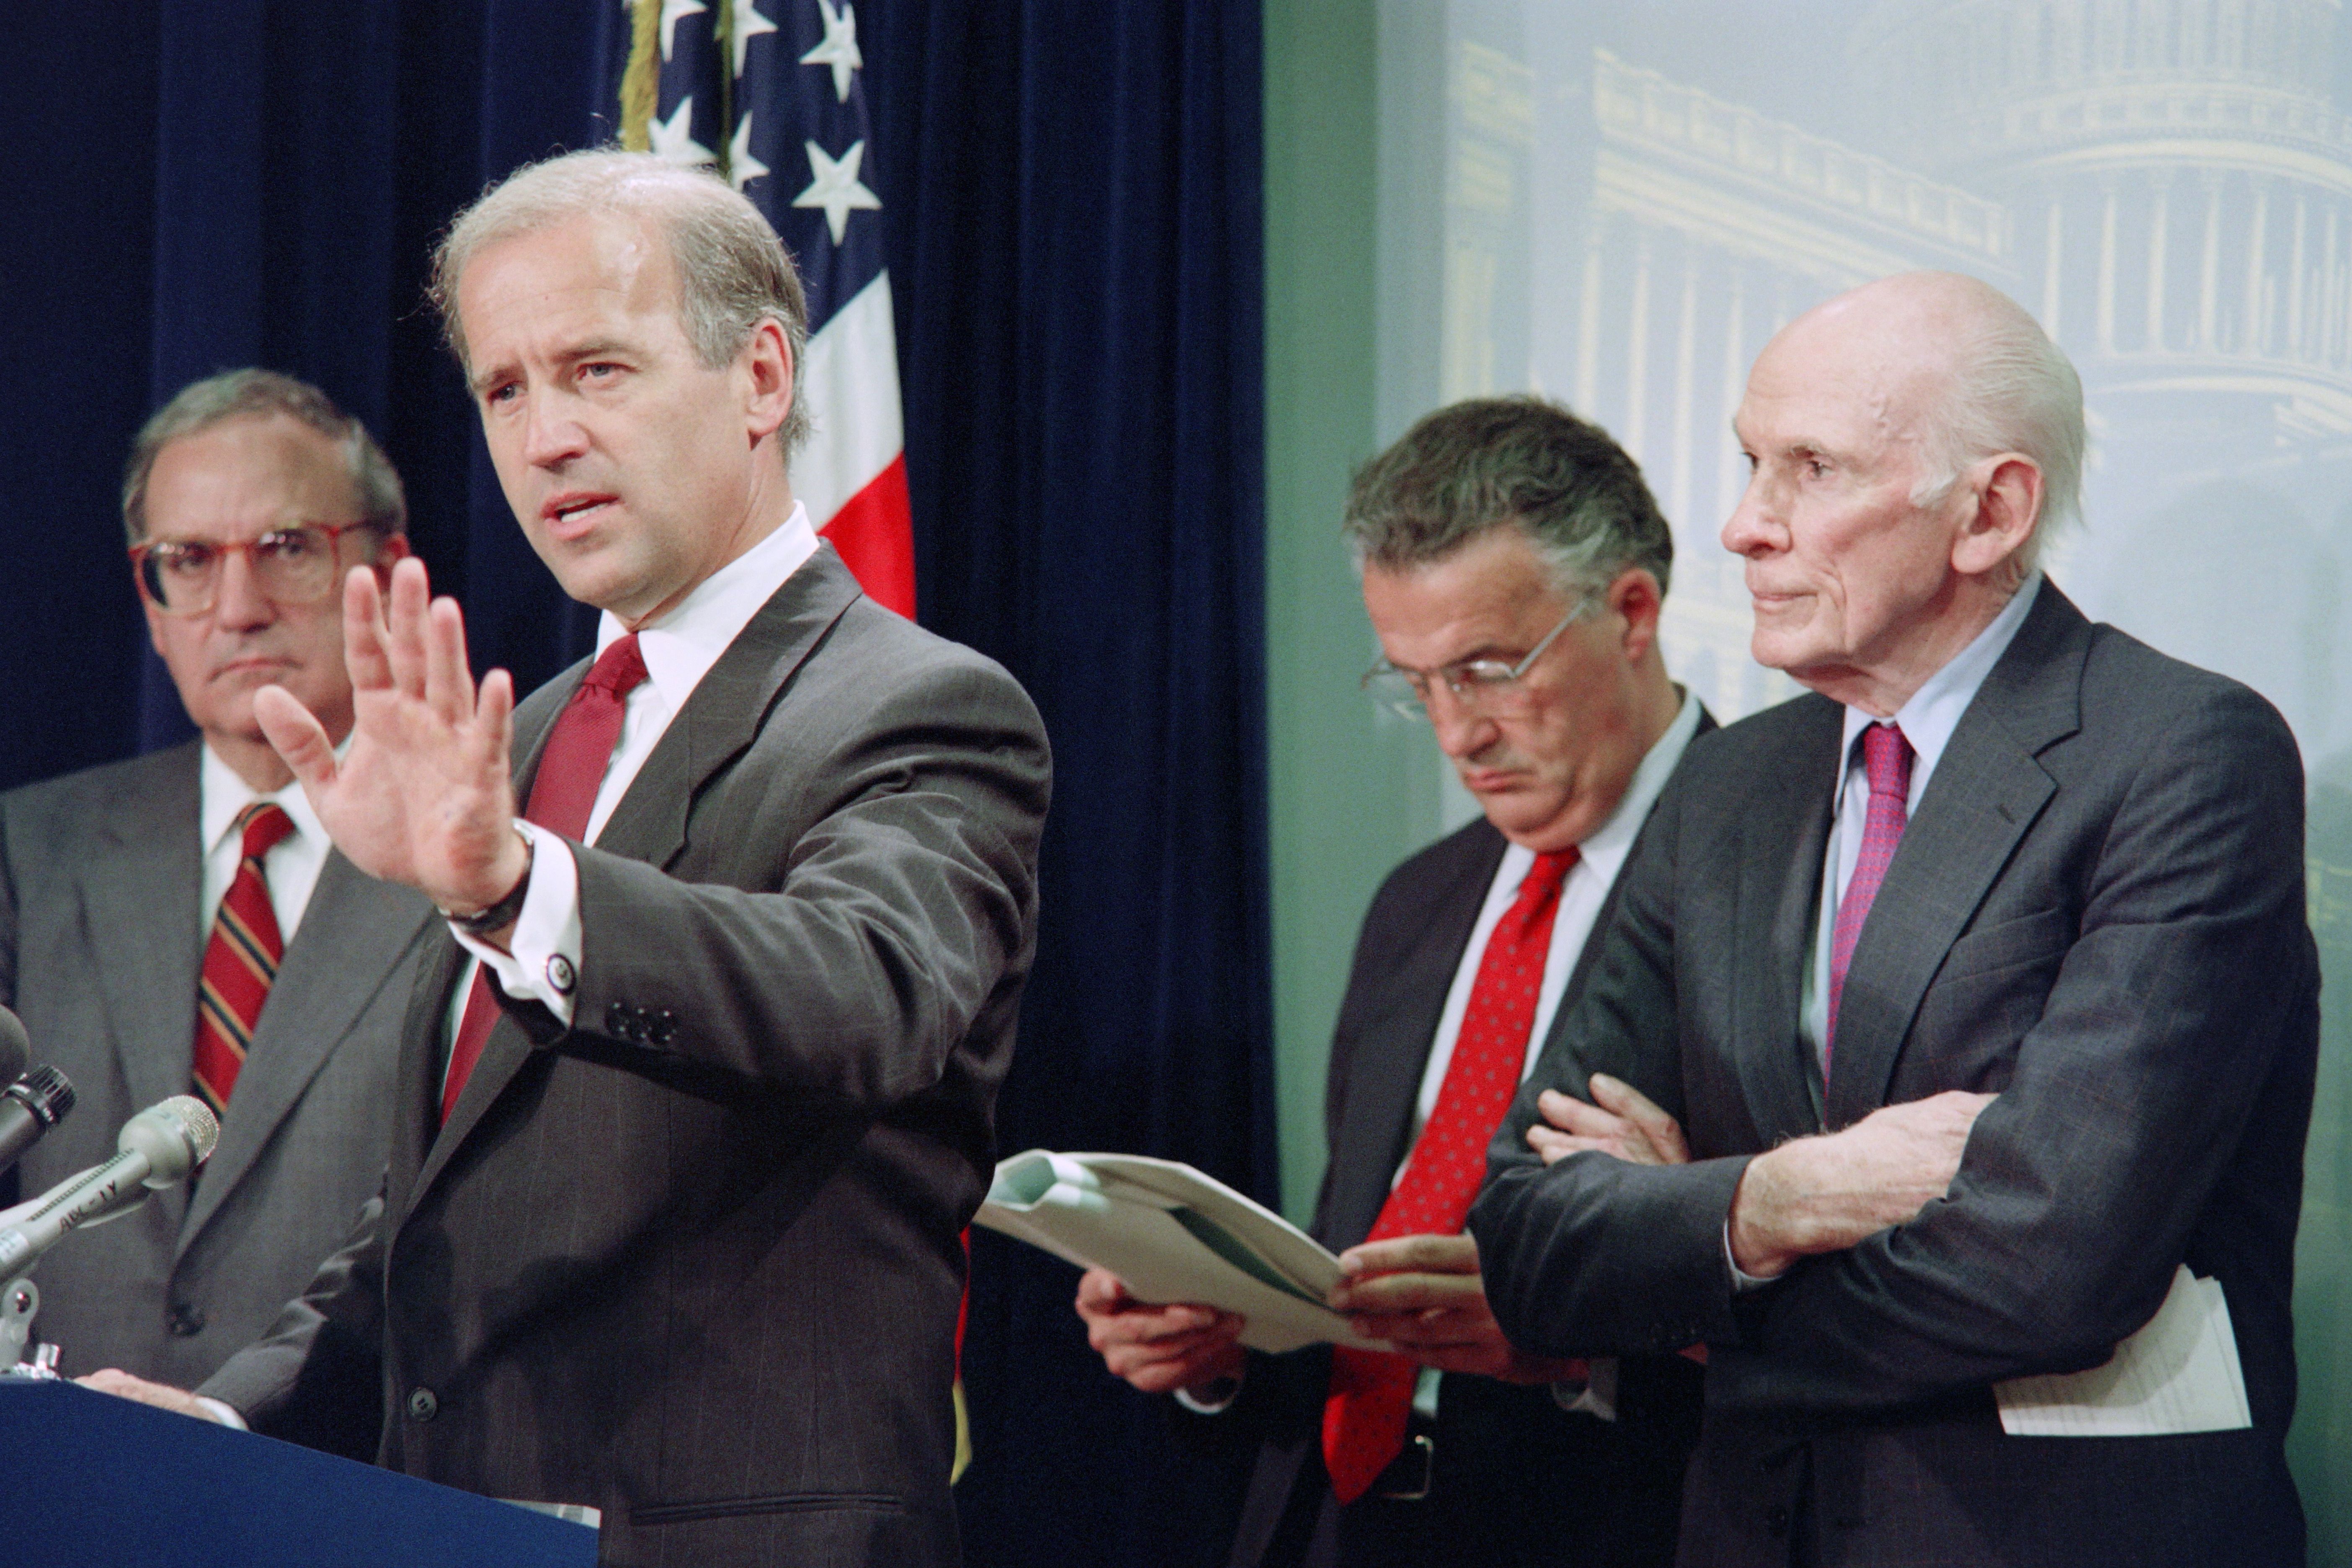 US Senator Joseph Biden, D-Del., talks to reporters on June 25, 1991 on a Senate proposal to scale back conditions for normal trade relations between China and the United States. - The proposal was made by Senate Majority Leadre George Mitchell, D-Maine (L). (Photo by Kevin LARKIN / AFP) (Photo by KEVIN LARKIN/AFP via Getty Images)